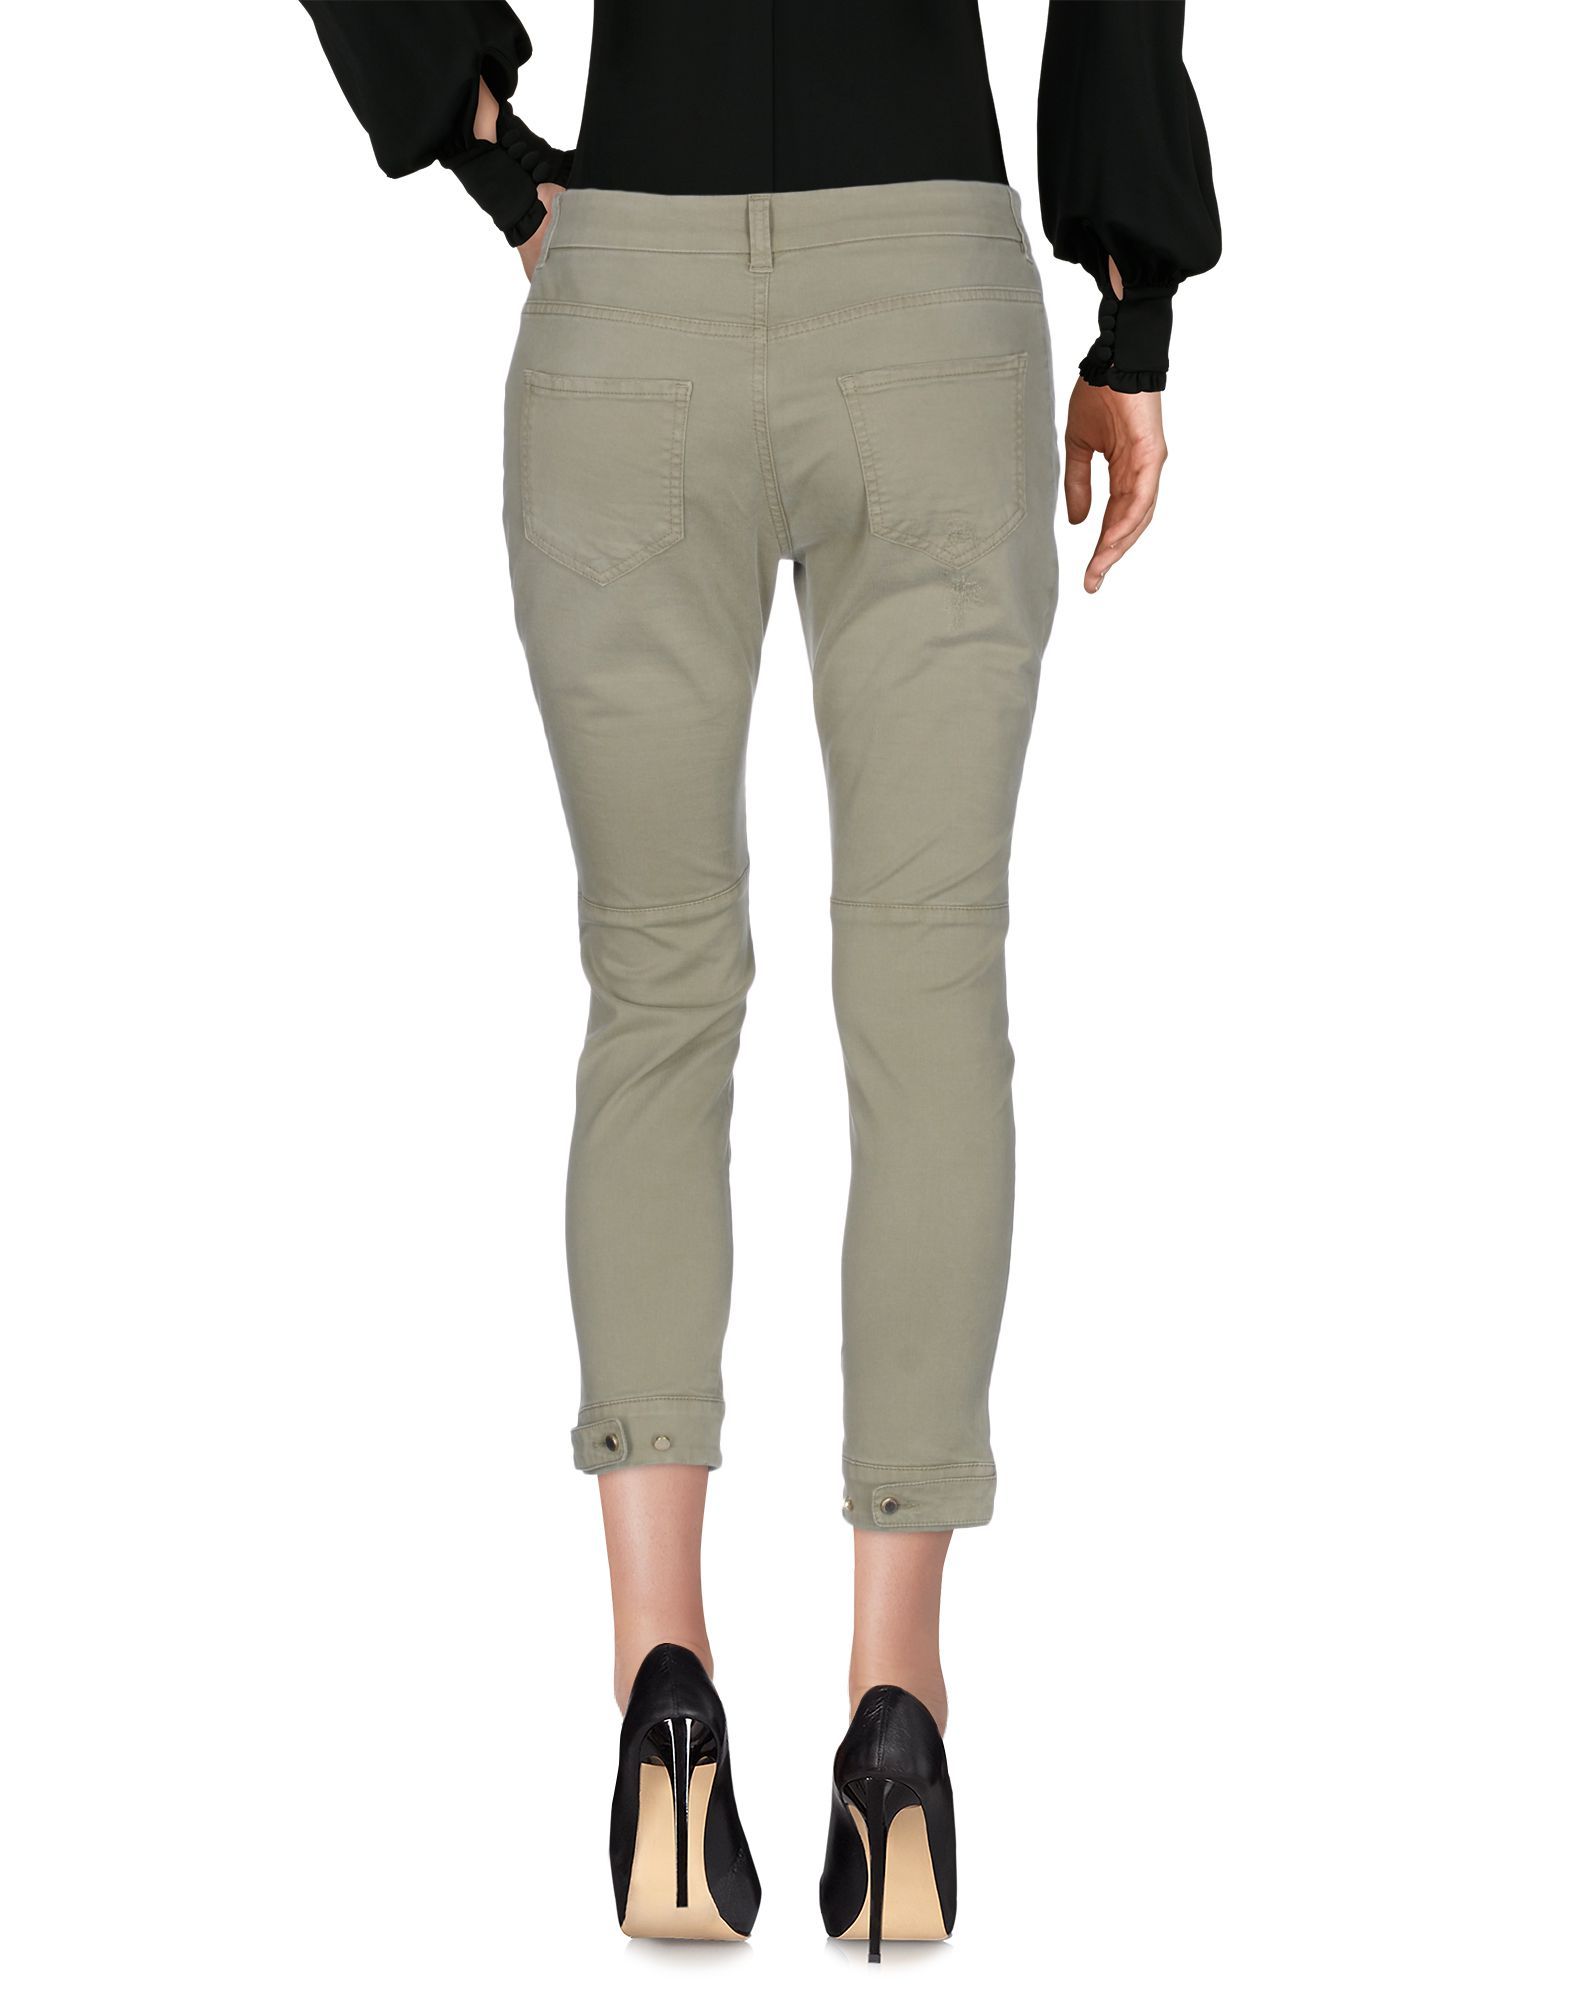 gabardine, worn effect, logo, solid colour, mid rise, comfort fit, tapered leg, button closing, multipockets, button closing hemline, stretch, chinos